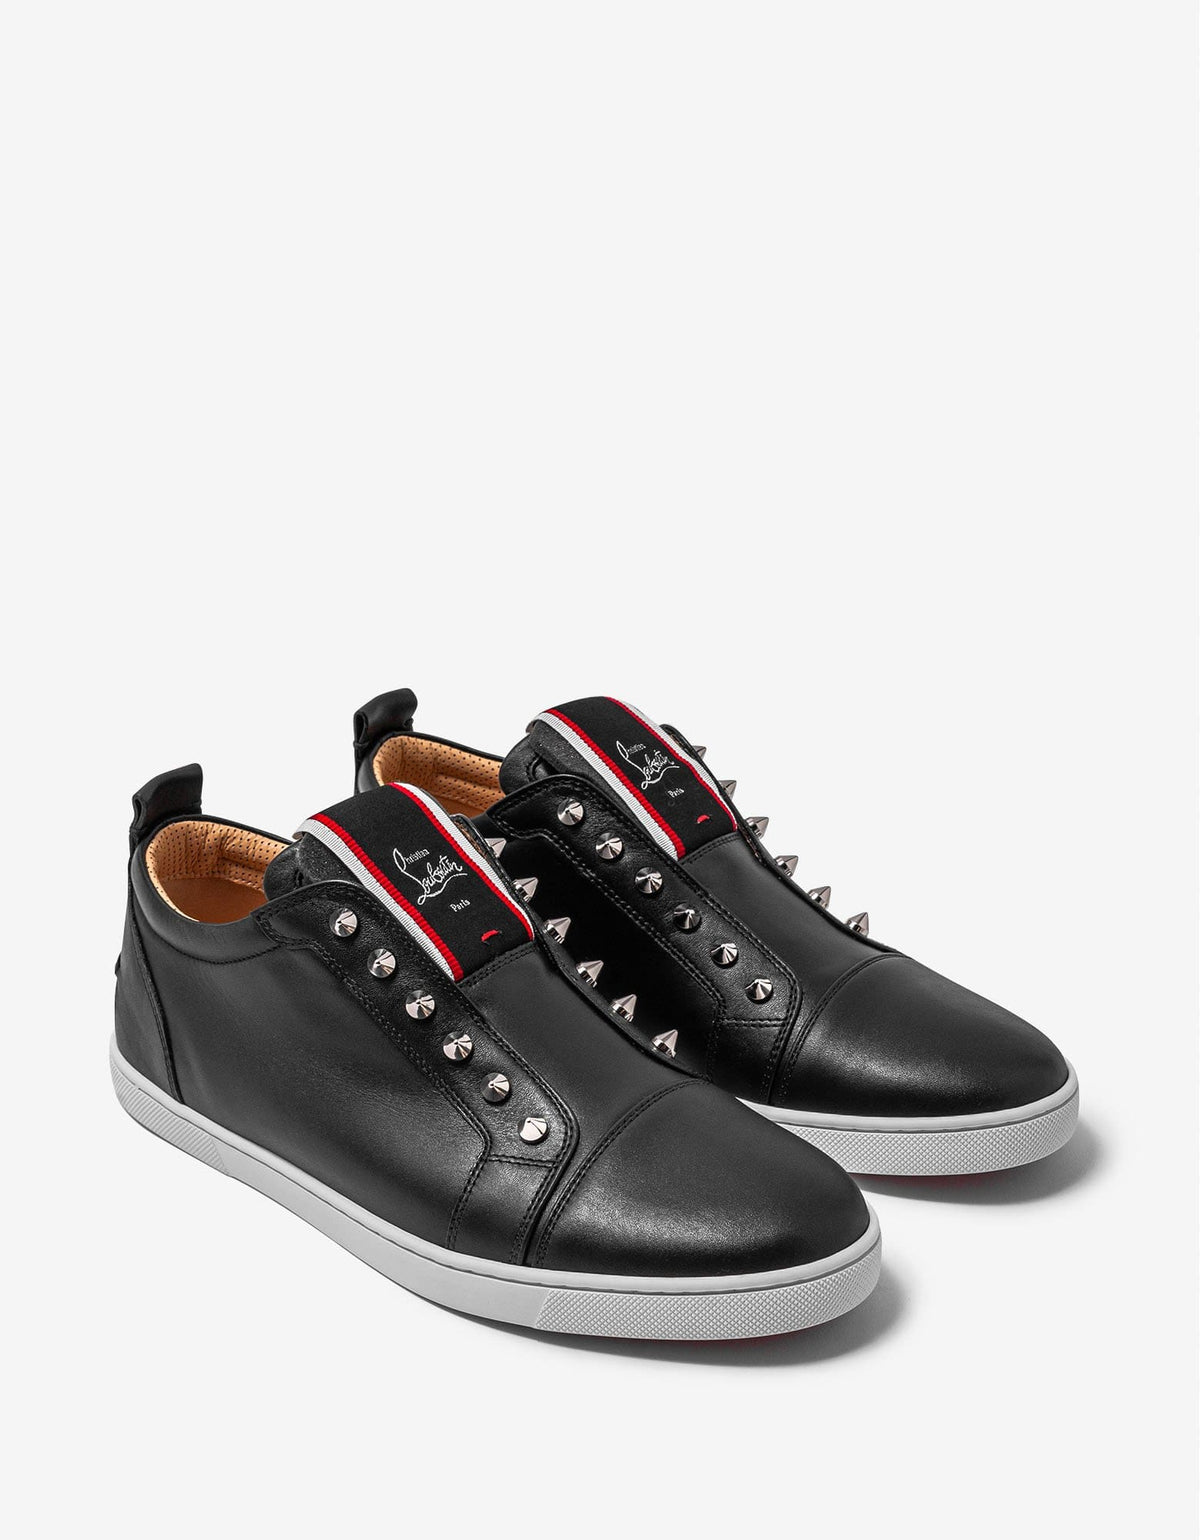 Christian Louboutin F.A.V Fique A Vontade Black Leather Trainers -